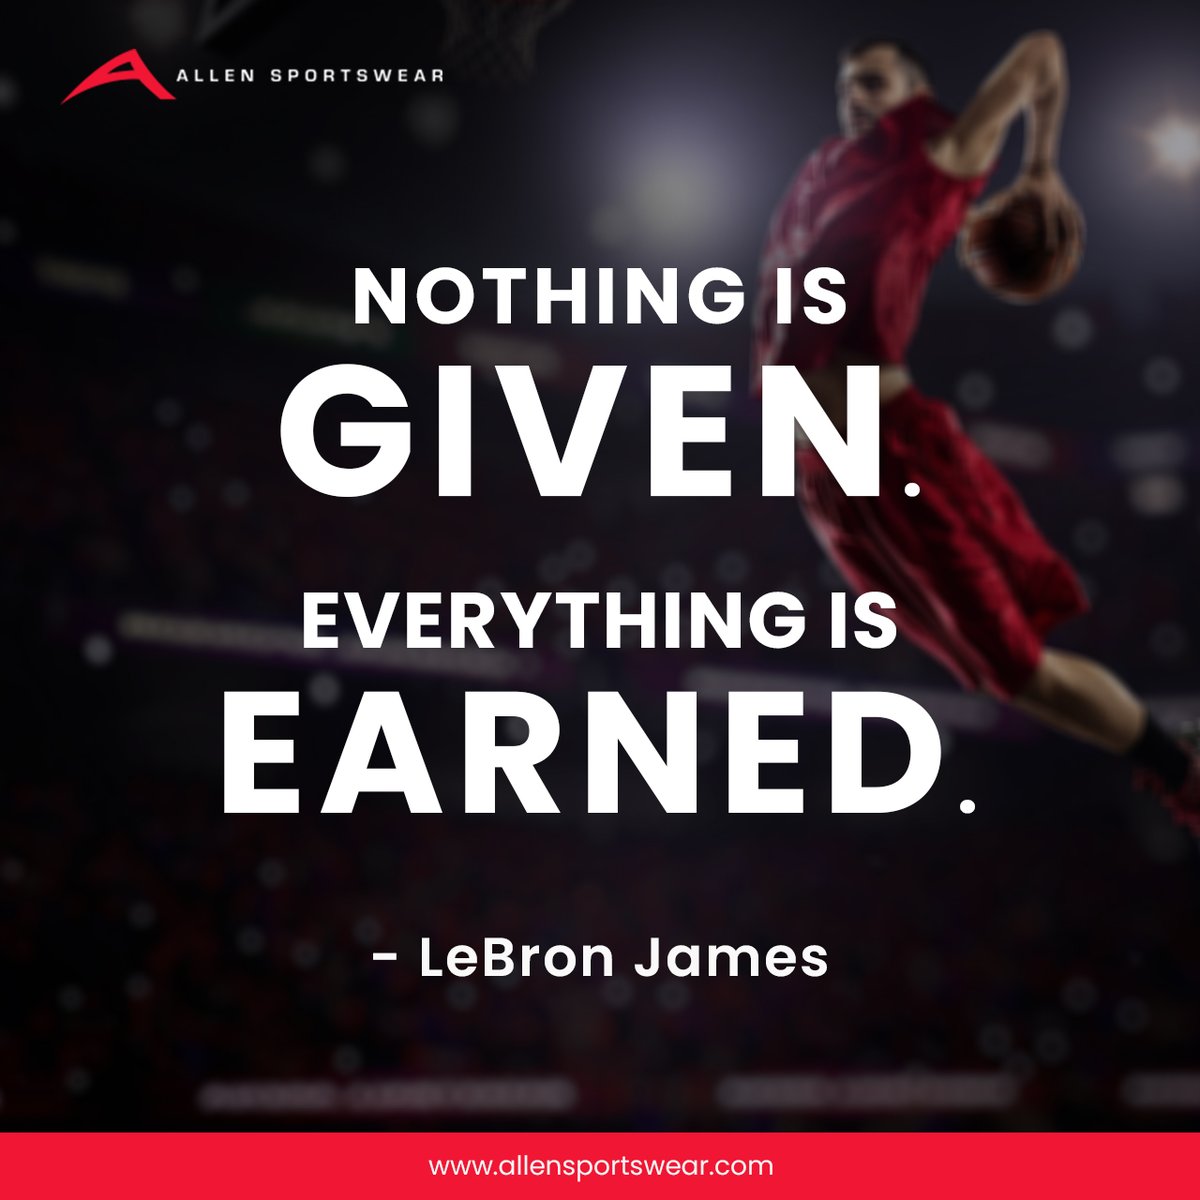 Nothing is Given. Everything is Earned.
LeBron James

#allensportswear #earnednotgiven #hardworkpaysoff #earnyoursuccess #noshortcuts #workforit #chaseyourdreams #nothingisgiven #successmindset #hustleforgreatness #earniteveryday #striveforgreatness